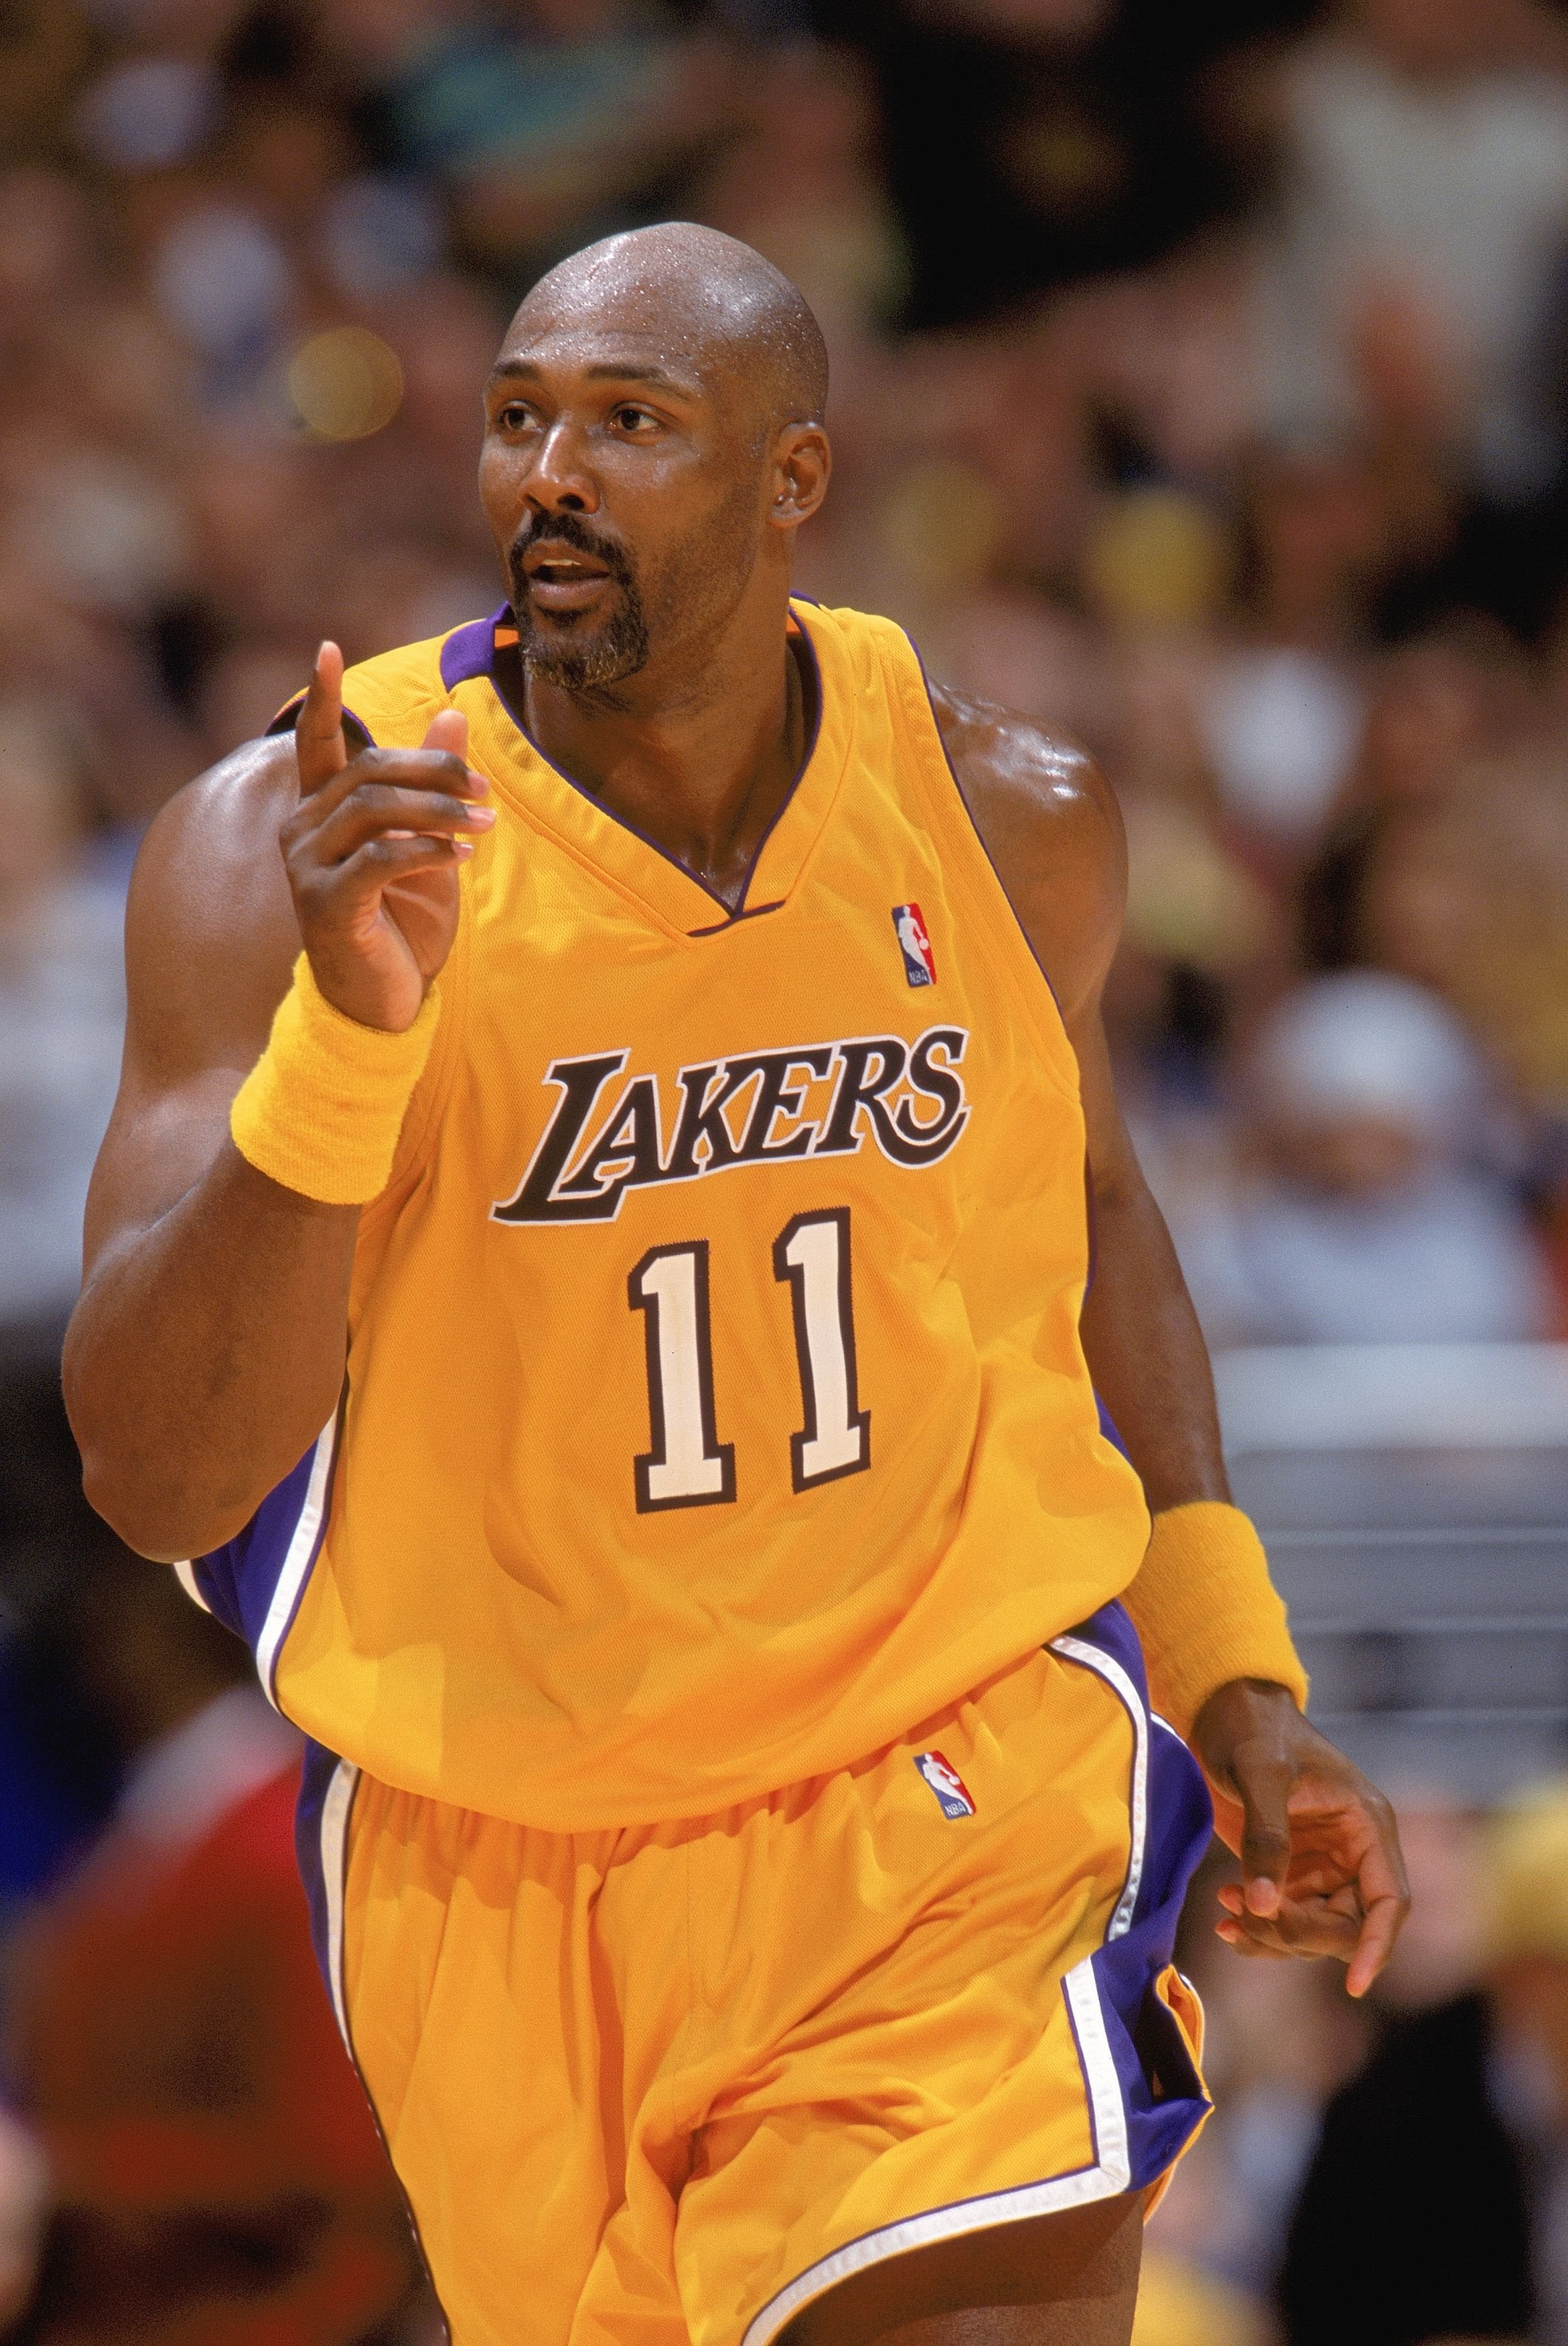 Karl Malone plays for the Los Angeles Lakers at the 2004 NBA Playoffs against the Houston Rockets | Source: Getty Images 